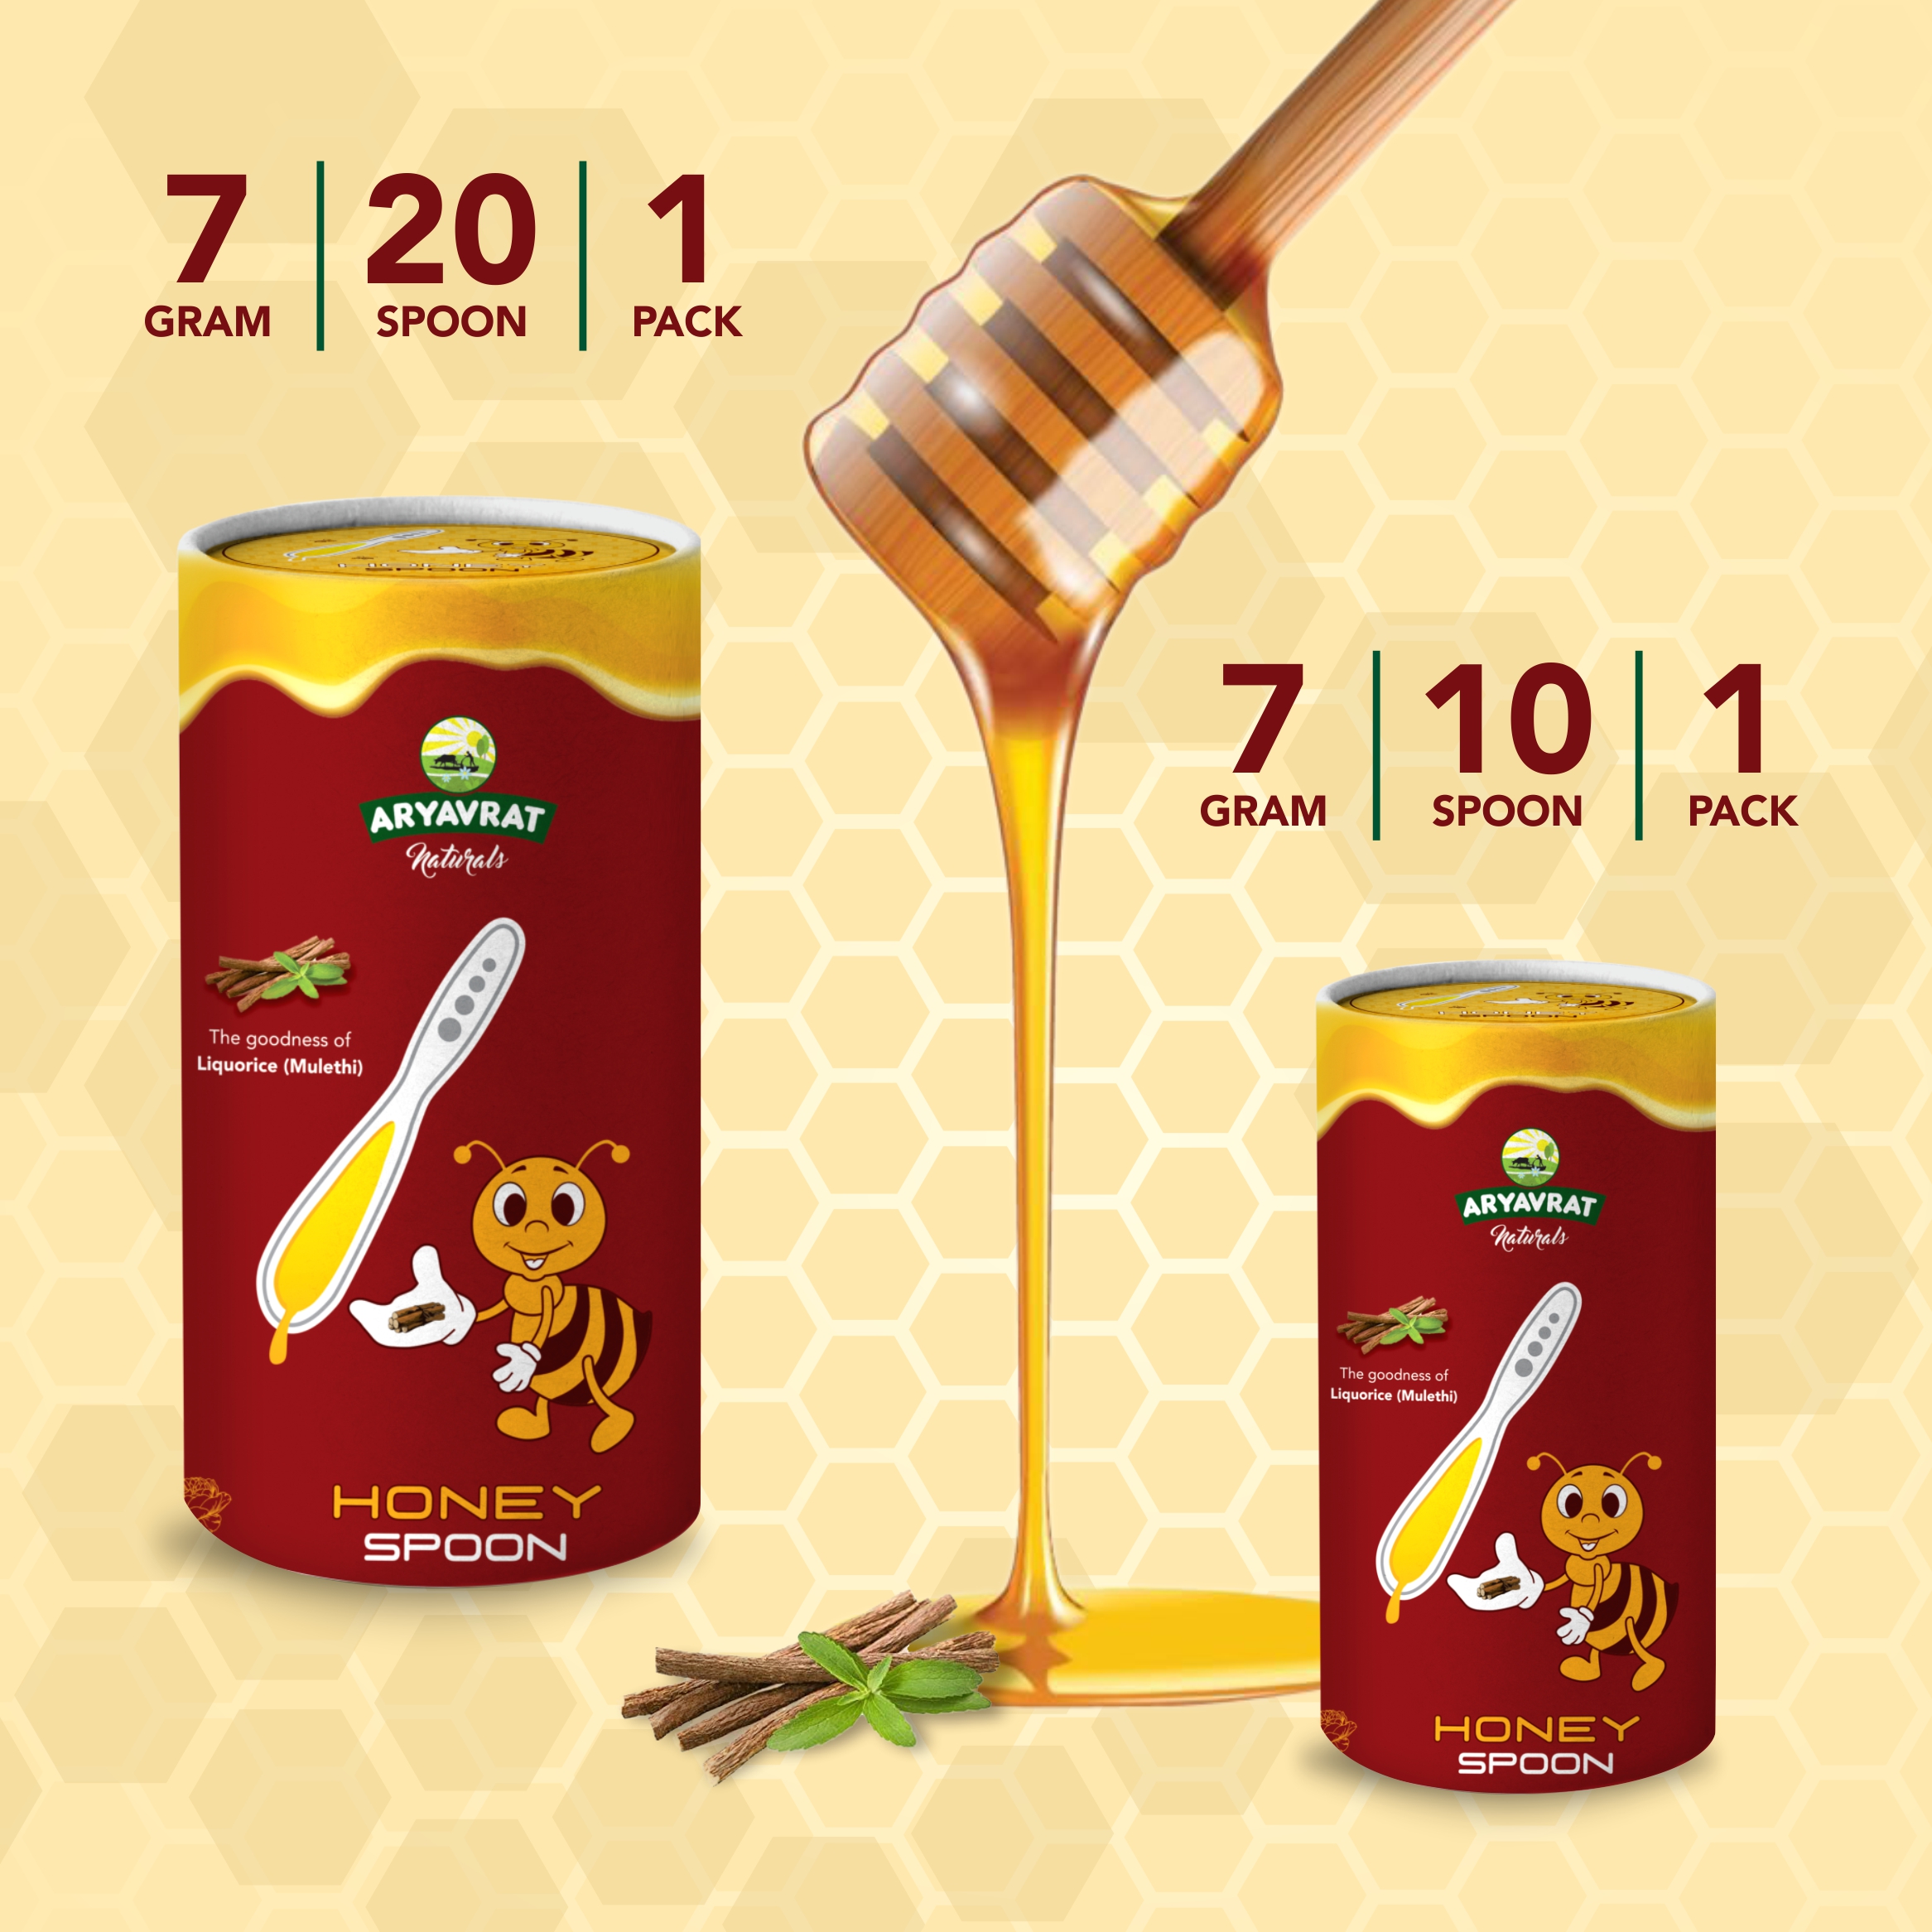 Buy Aryavrat Naturals -Licorice- Mulethi Honey Spoon 100% Pure Organic and Natural Pack of Honey Spoons at Best Price Online